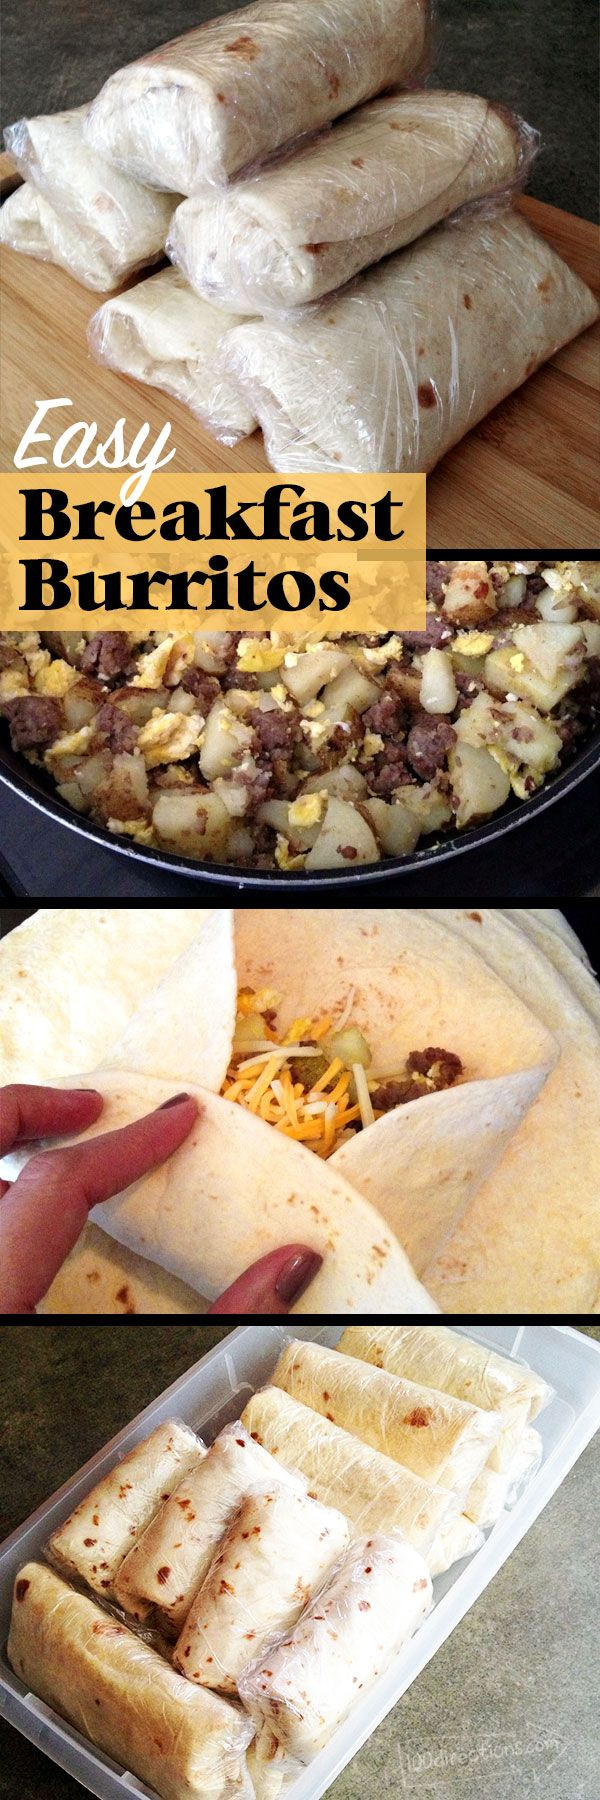 Breakfast Burritos For A Crowd
 Best 25 Camping ideas on Pinterest